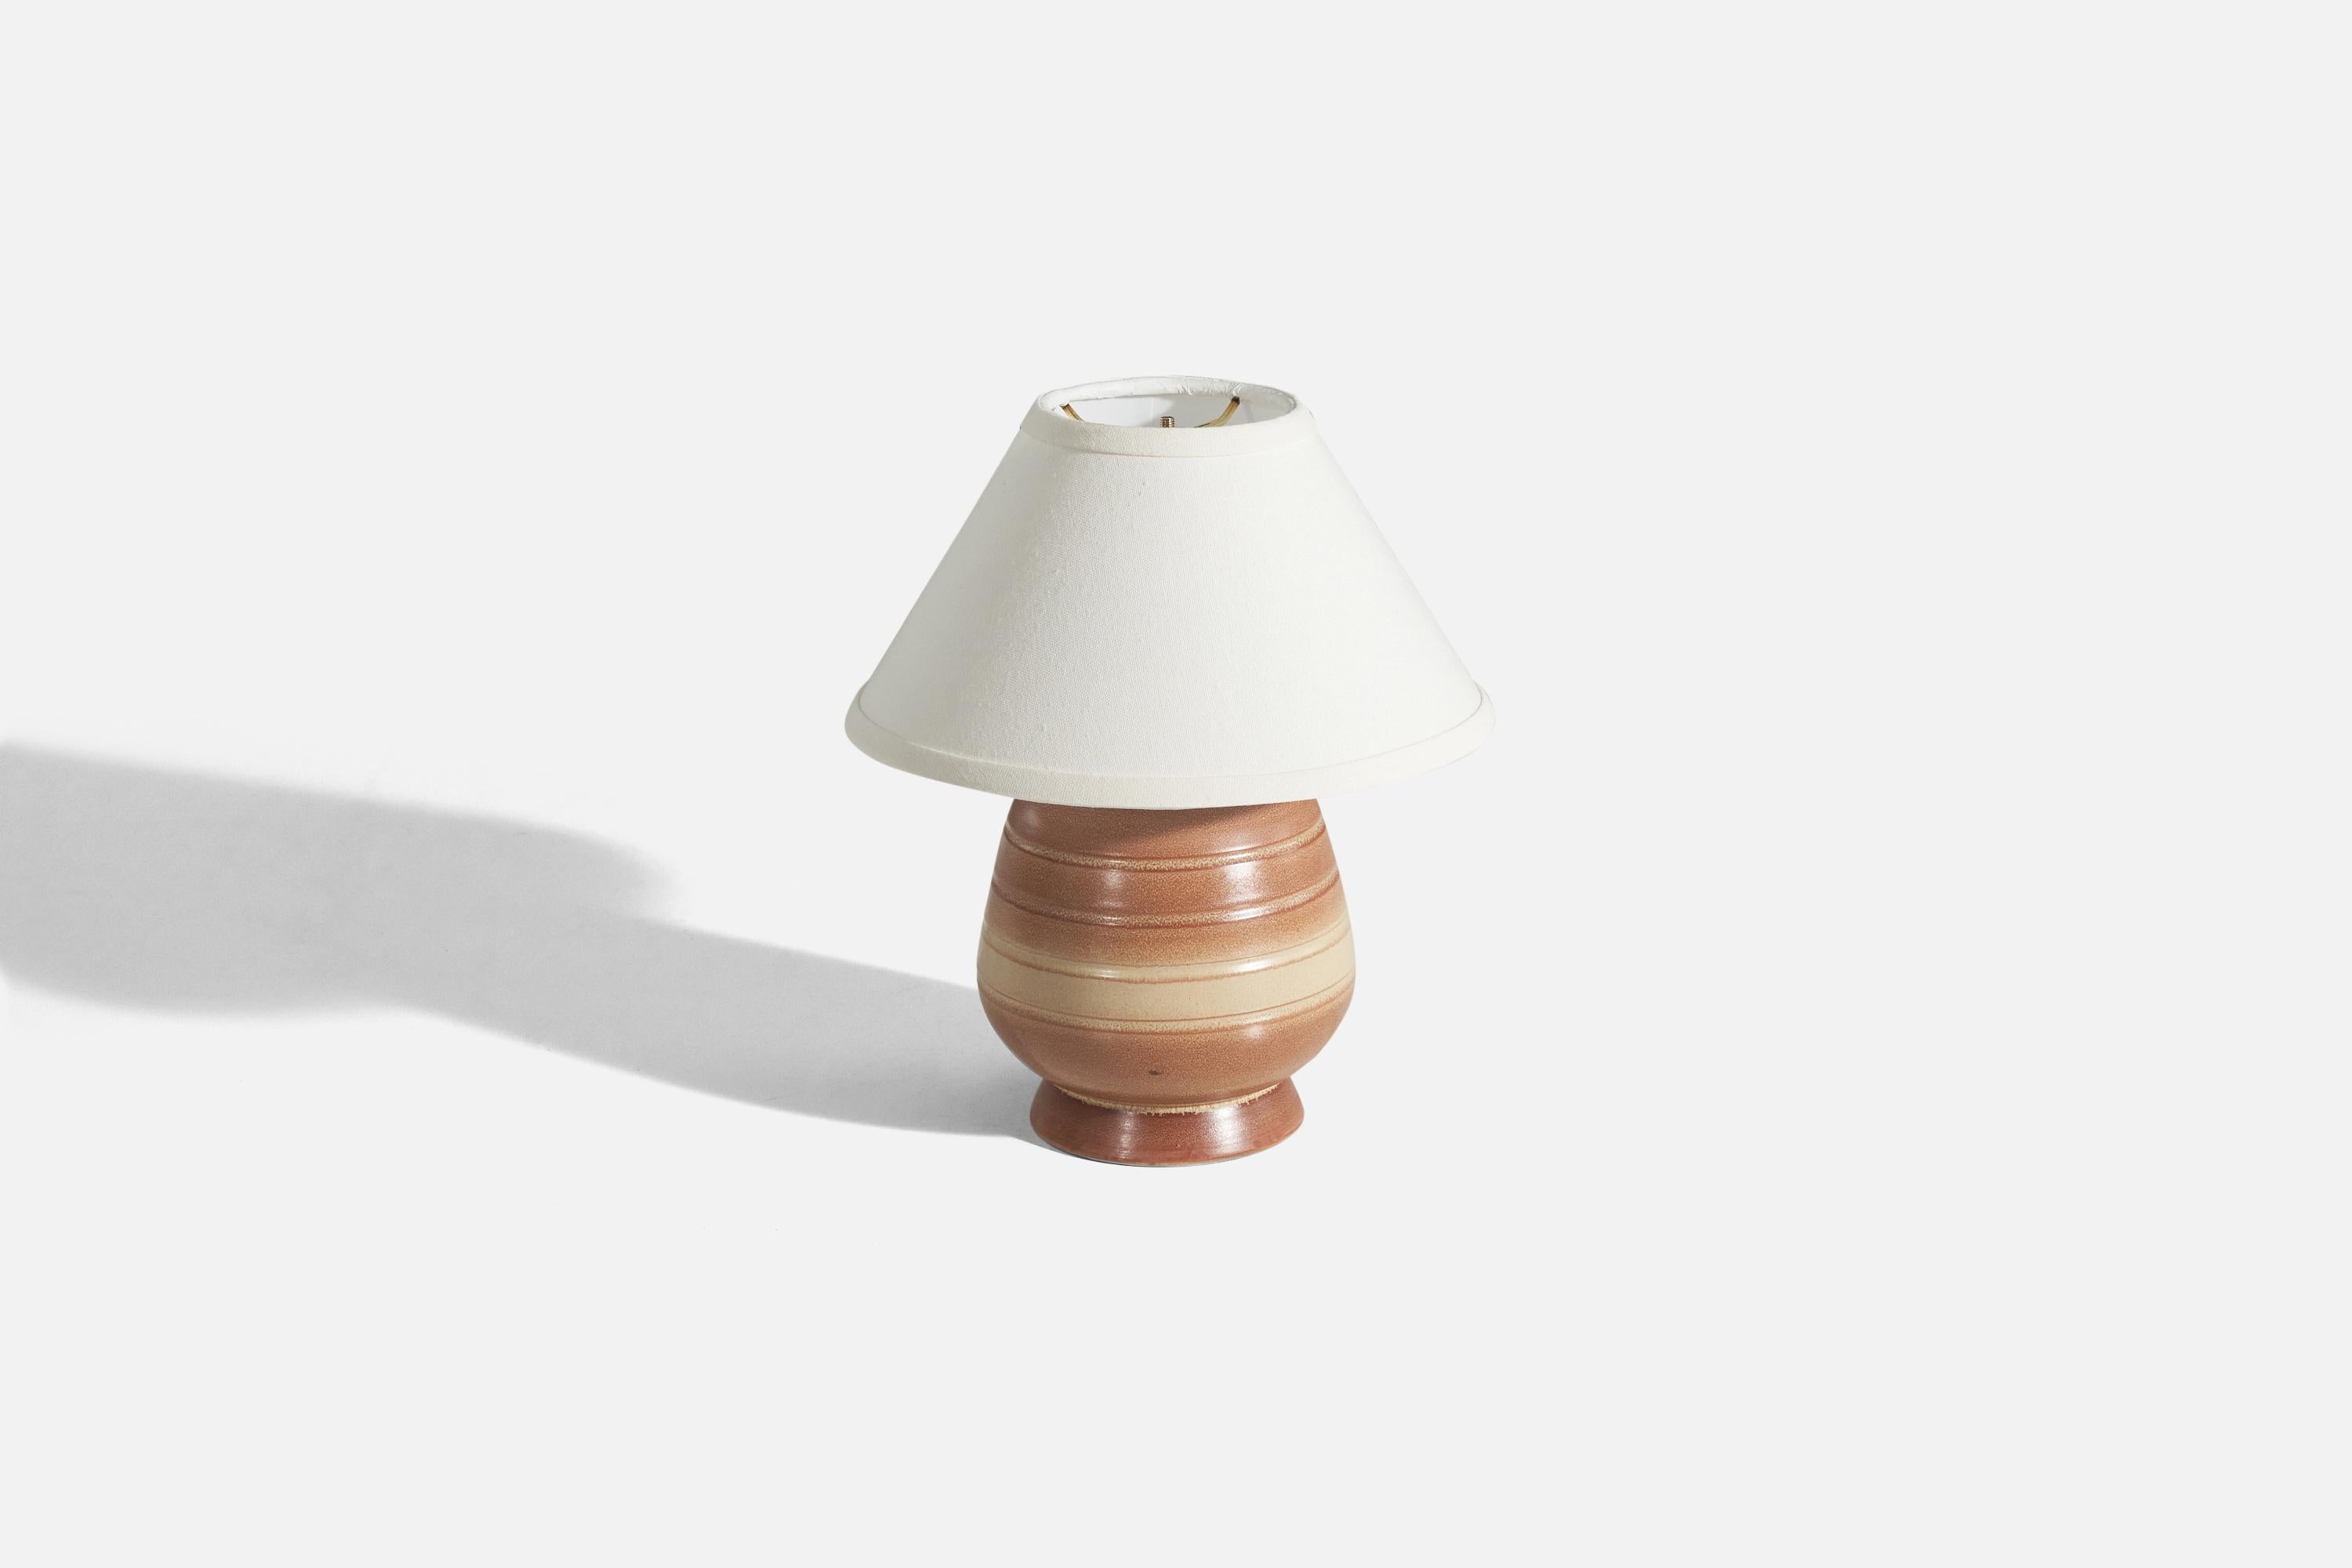 A glazed earthenware table lamp produced in Sweden c. 1960s.

Sold without lampshade. 
Dimensions of lamp (inches) : 9.43 x 6.31 x 6.31 (Height x Width x Depth)
Dimensions of shade (inches) : 4.25 x 10.25 x 6 (Top Diameter x Bottom Diameter x